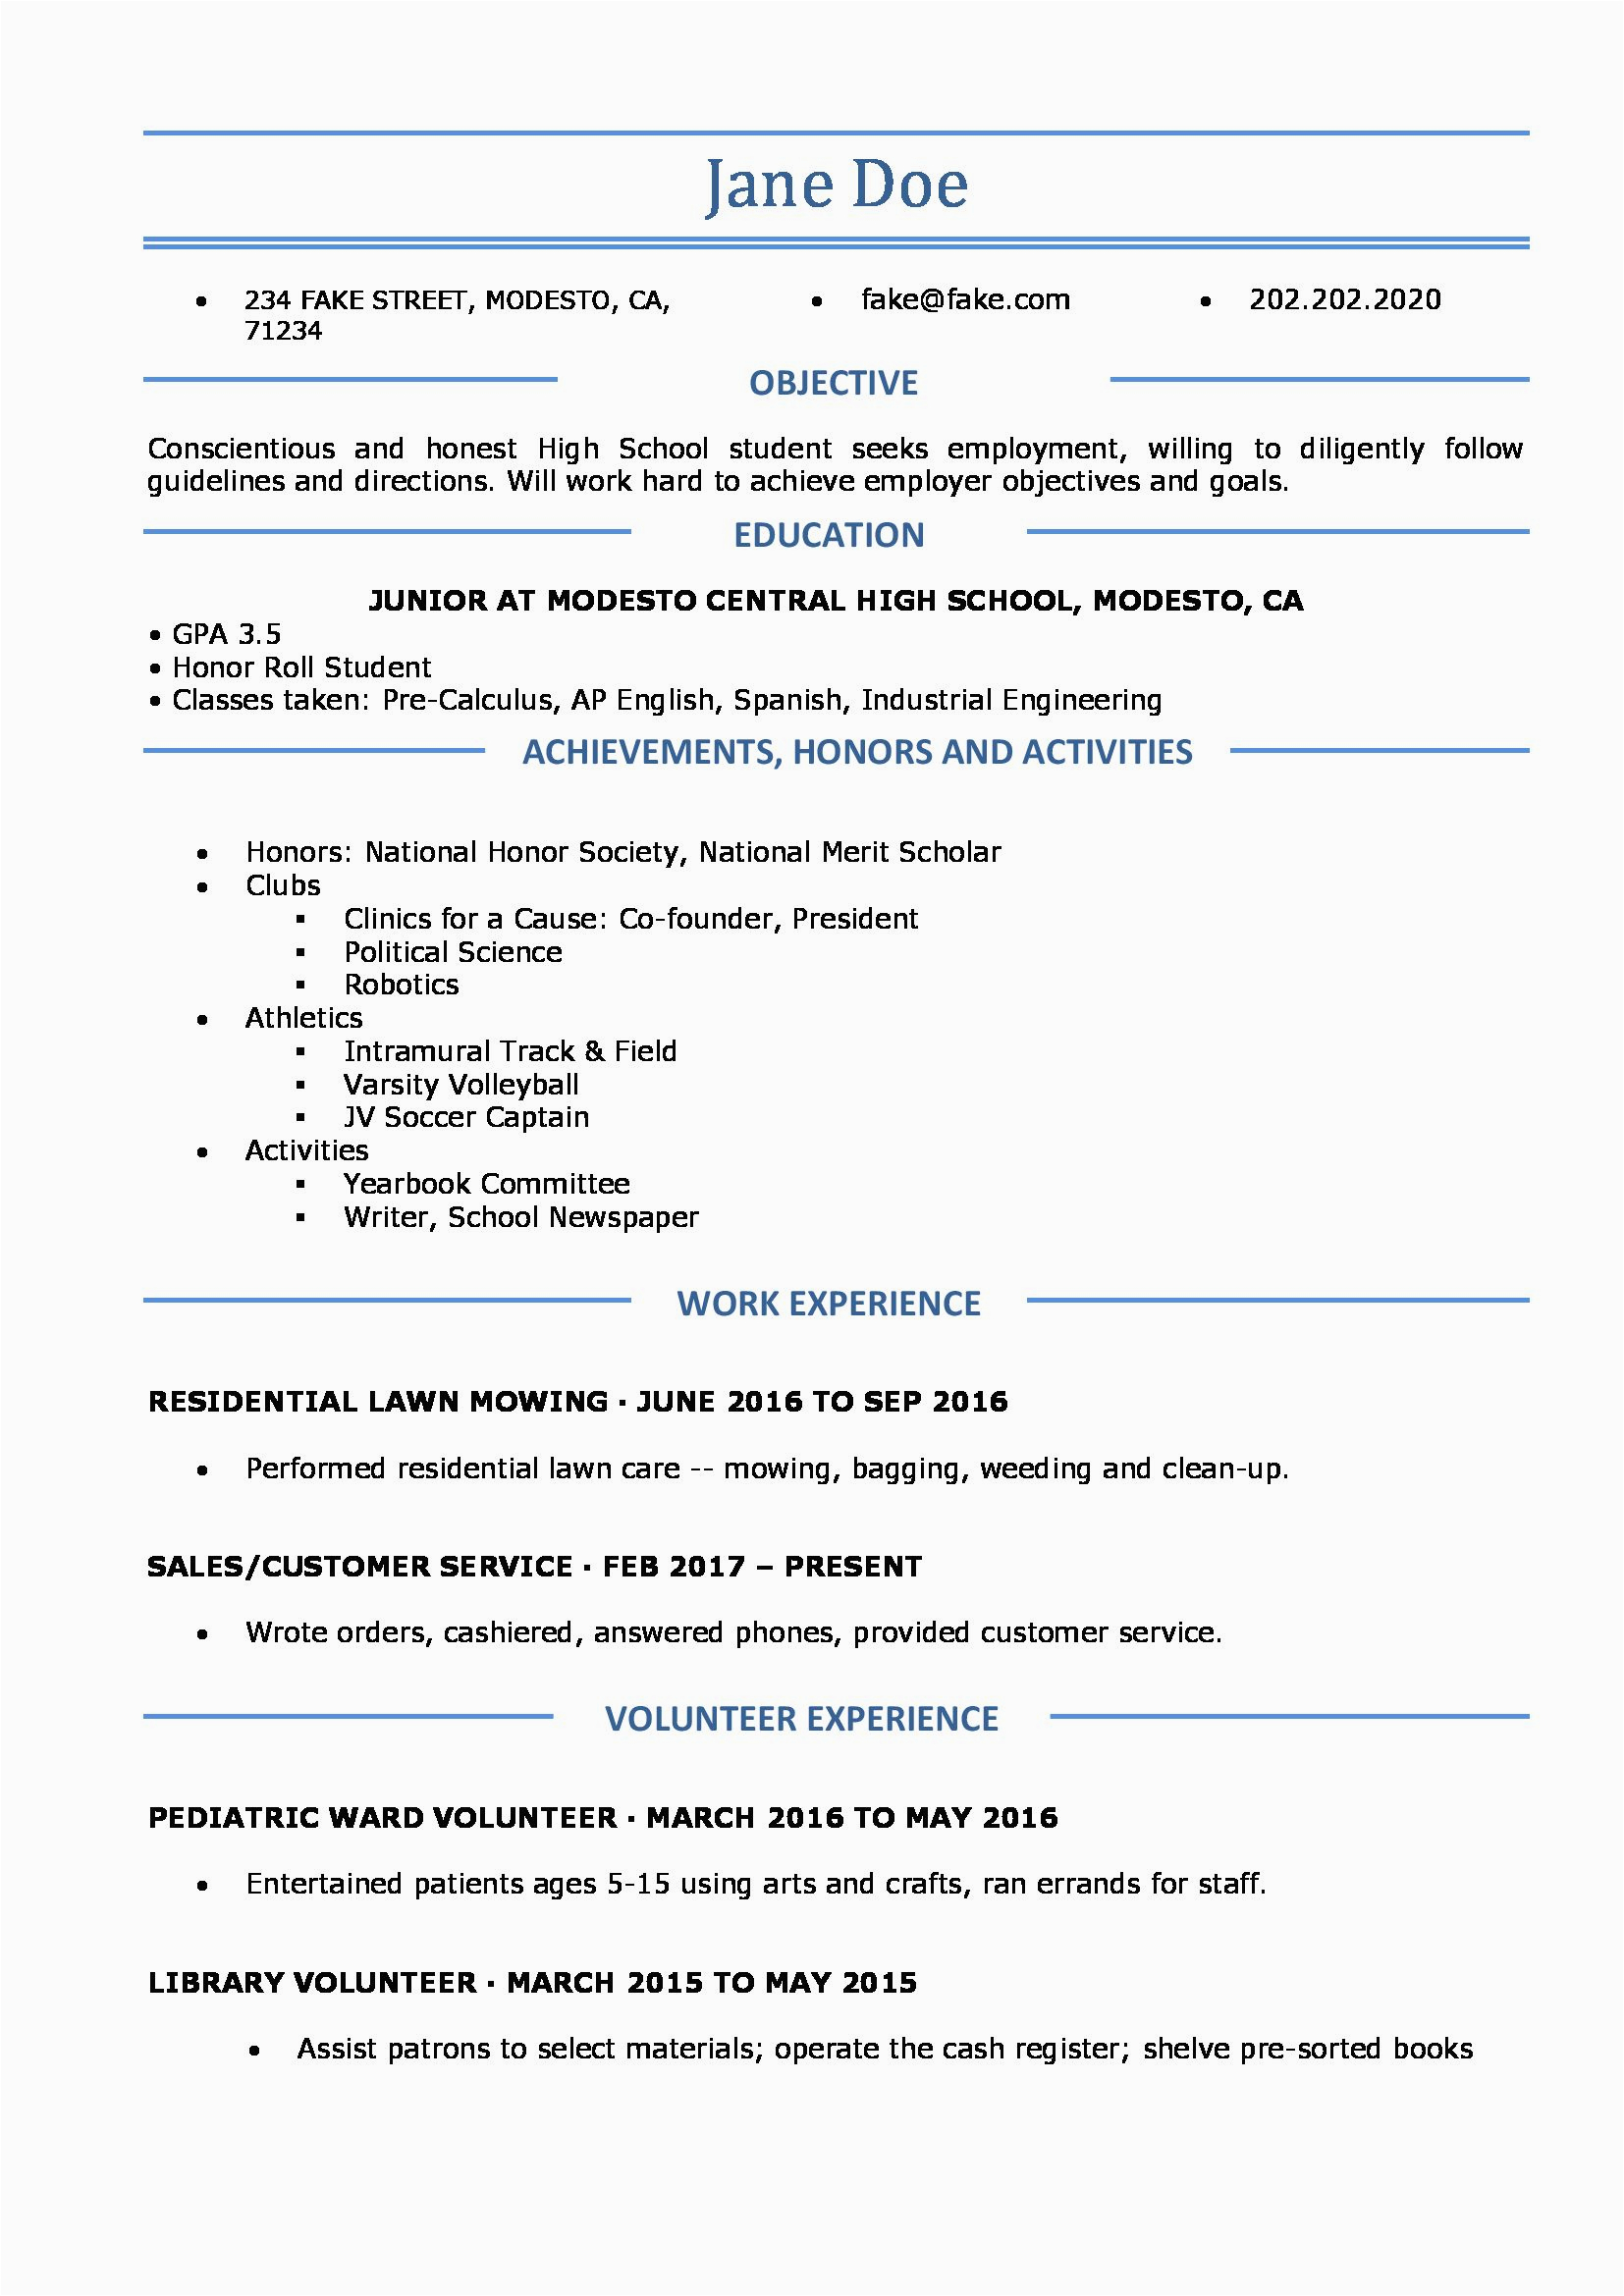 Simple Resume Template for High School Students Resumes for High School Students Luxury High School Resume